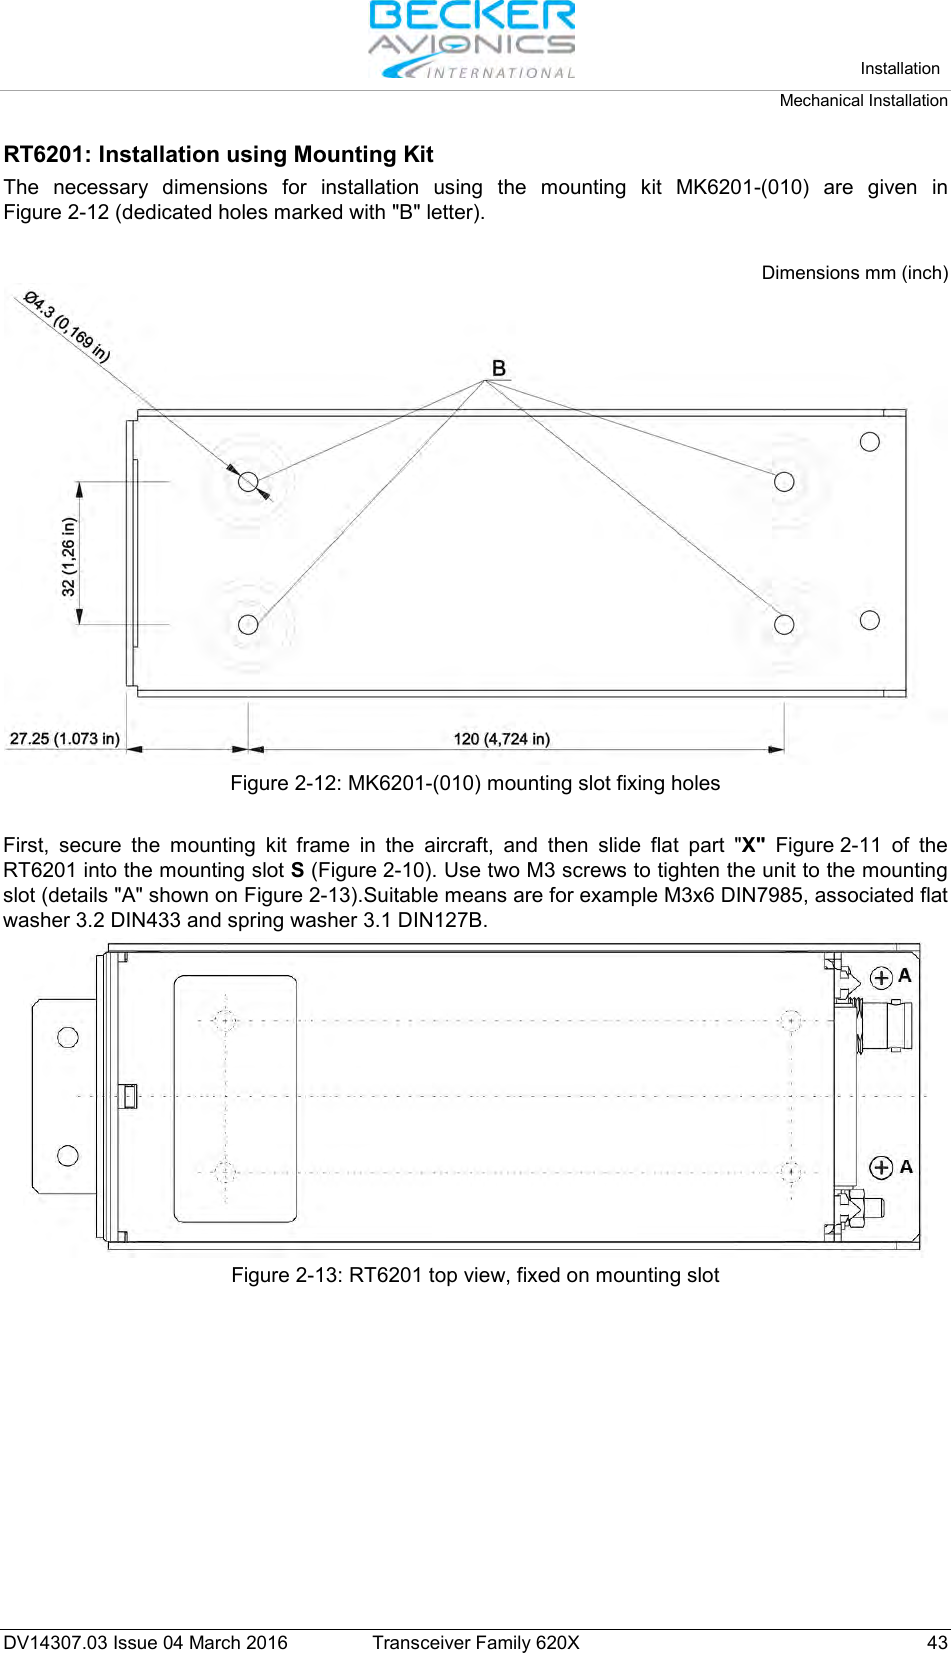   Installation Mechanical Installation  DV14307.03 Issue 04 March 2016 Transceiver Family 620X 43 RT6201: Installation using Mounting Kit The necessary dimensions for installation using the mounting kit MK6201-(010) are given in Figure 2-12 (dedicated holes marked with &quot;B&quot; letter).  Dimensions mm (inch)  Figure 2-12: MK6201-(010) mounting slot fixing holes  First, secure the mounting kit frame in the aircraft, and then slide flat part &quot;X&quot; Figure 2-11 of the RT6201 into the mounting slot S (Figure 2-10). Use two M3 screws to tighten the unit to the mounting slot (details &quot;A&quot; shown on Figure 2-13).Suitable means are for example M3x6 DIN7985, associated flat washer 3.2 DIN433 and spring washer 3.1 DIN127B.  Figure 2-13: RT6201 top view, fixed on mounting slot  